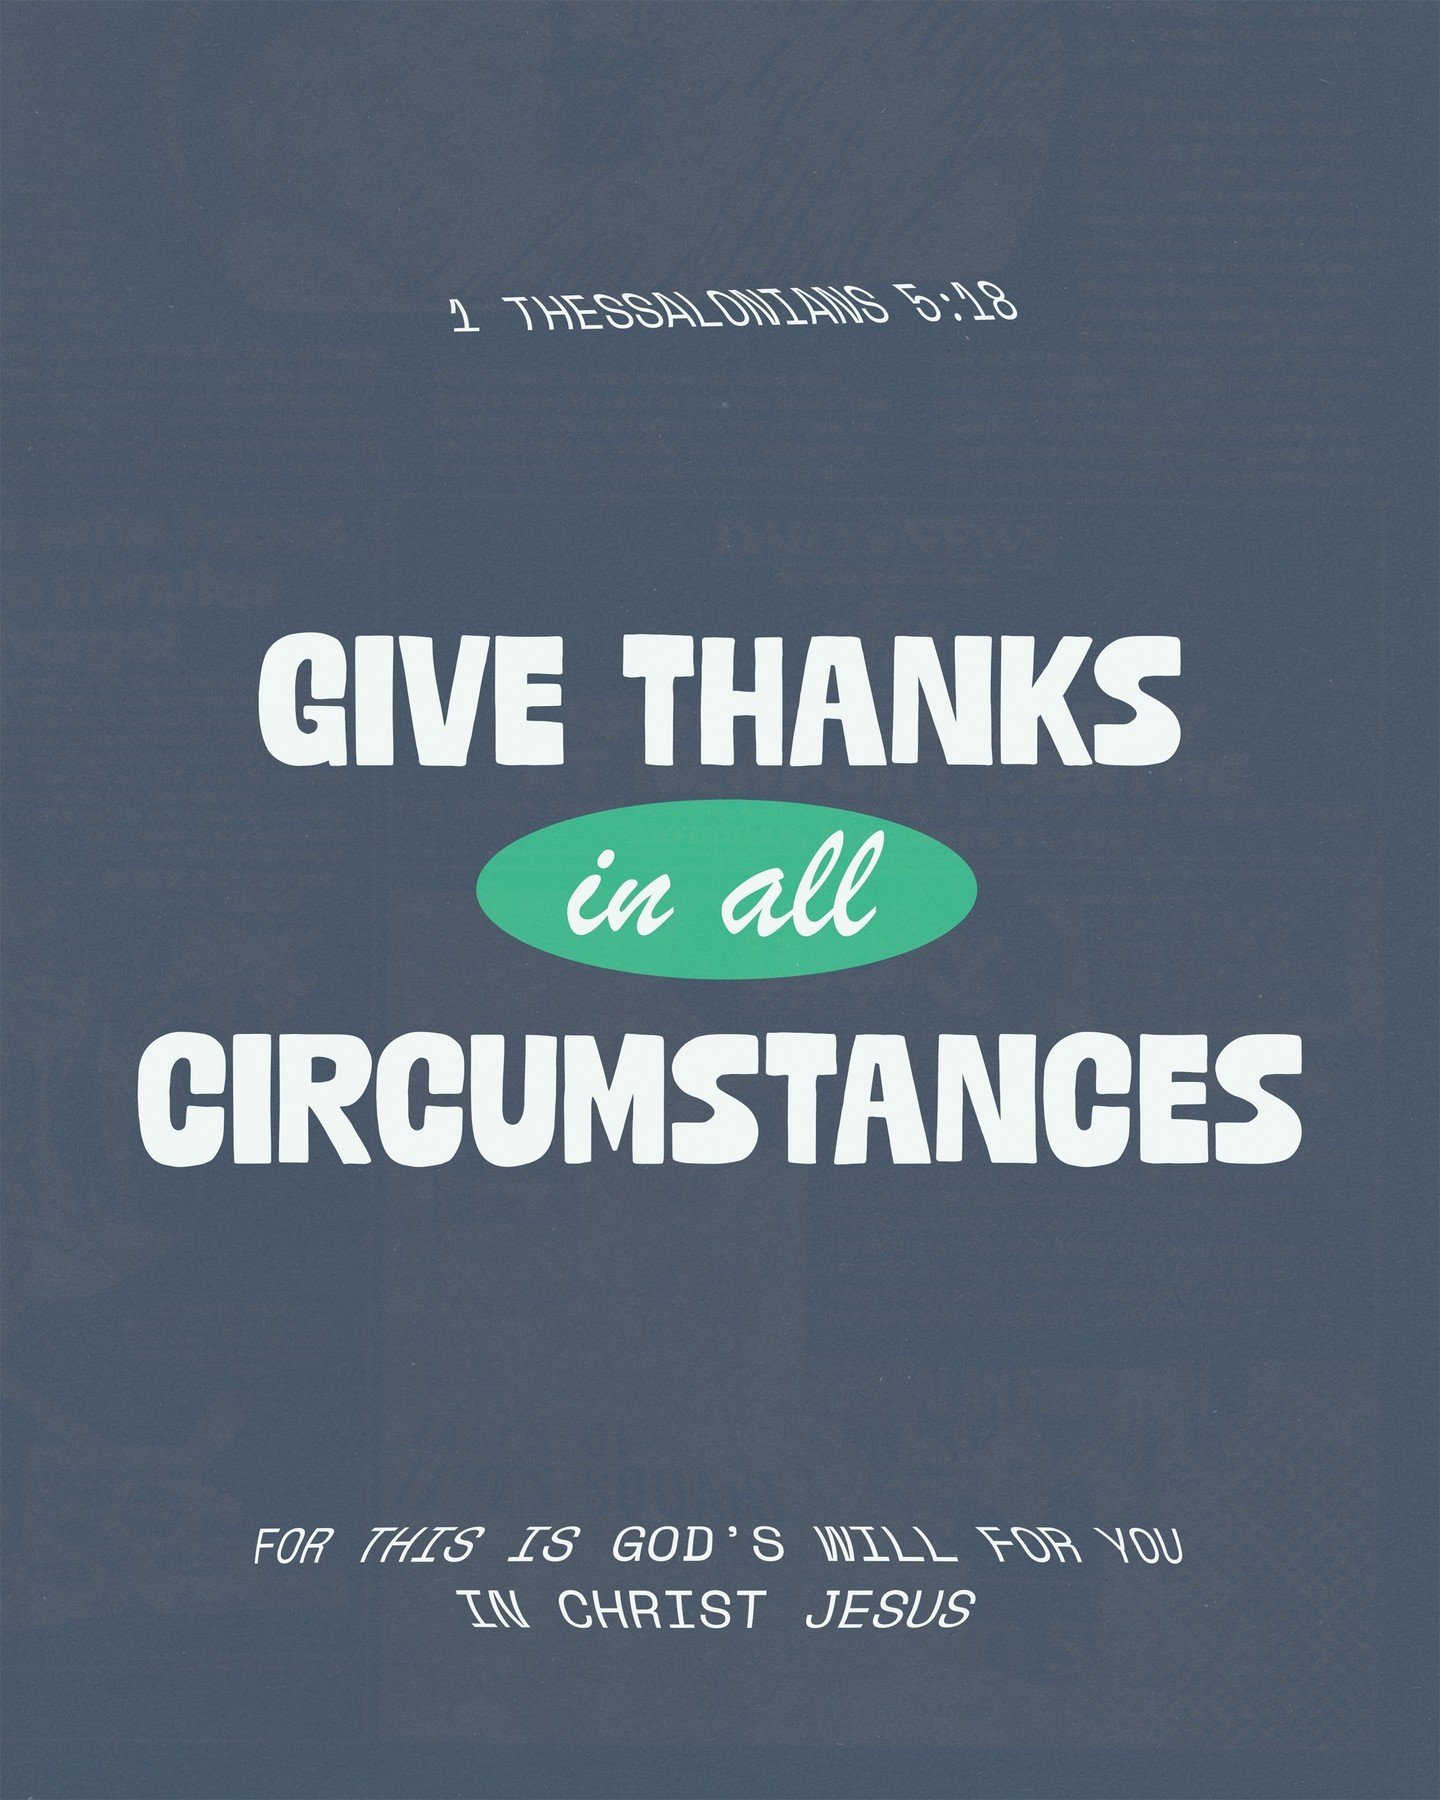 &quot;Give thanks in all circumstances; for this is God's will for you in Christ Jesus.&quot; - 1 Thessalonians 5:18
.
.
.
#church #god #morning #jesus #christ #love #christian #worship #bible #1thessalonians